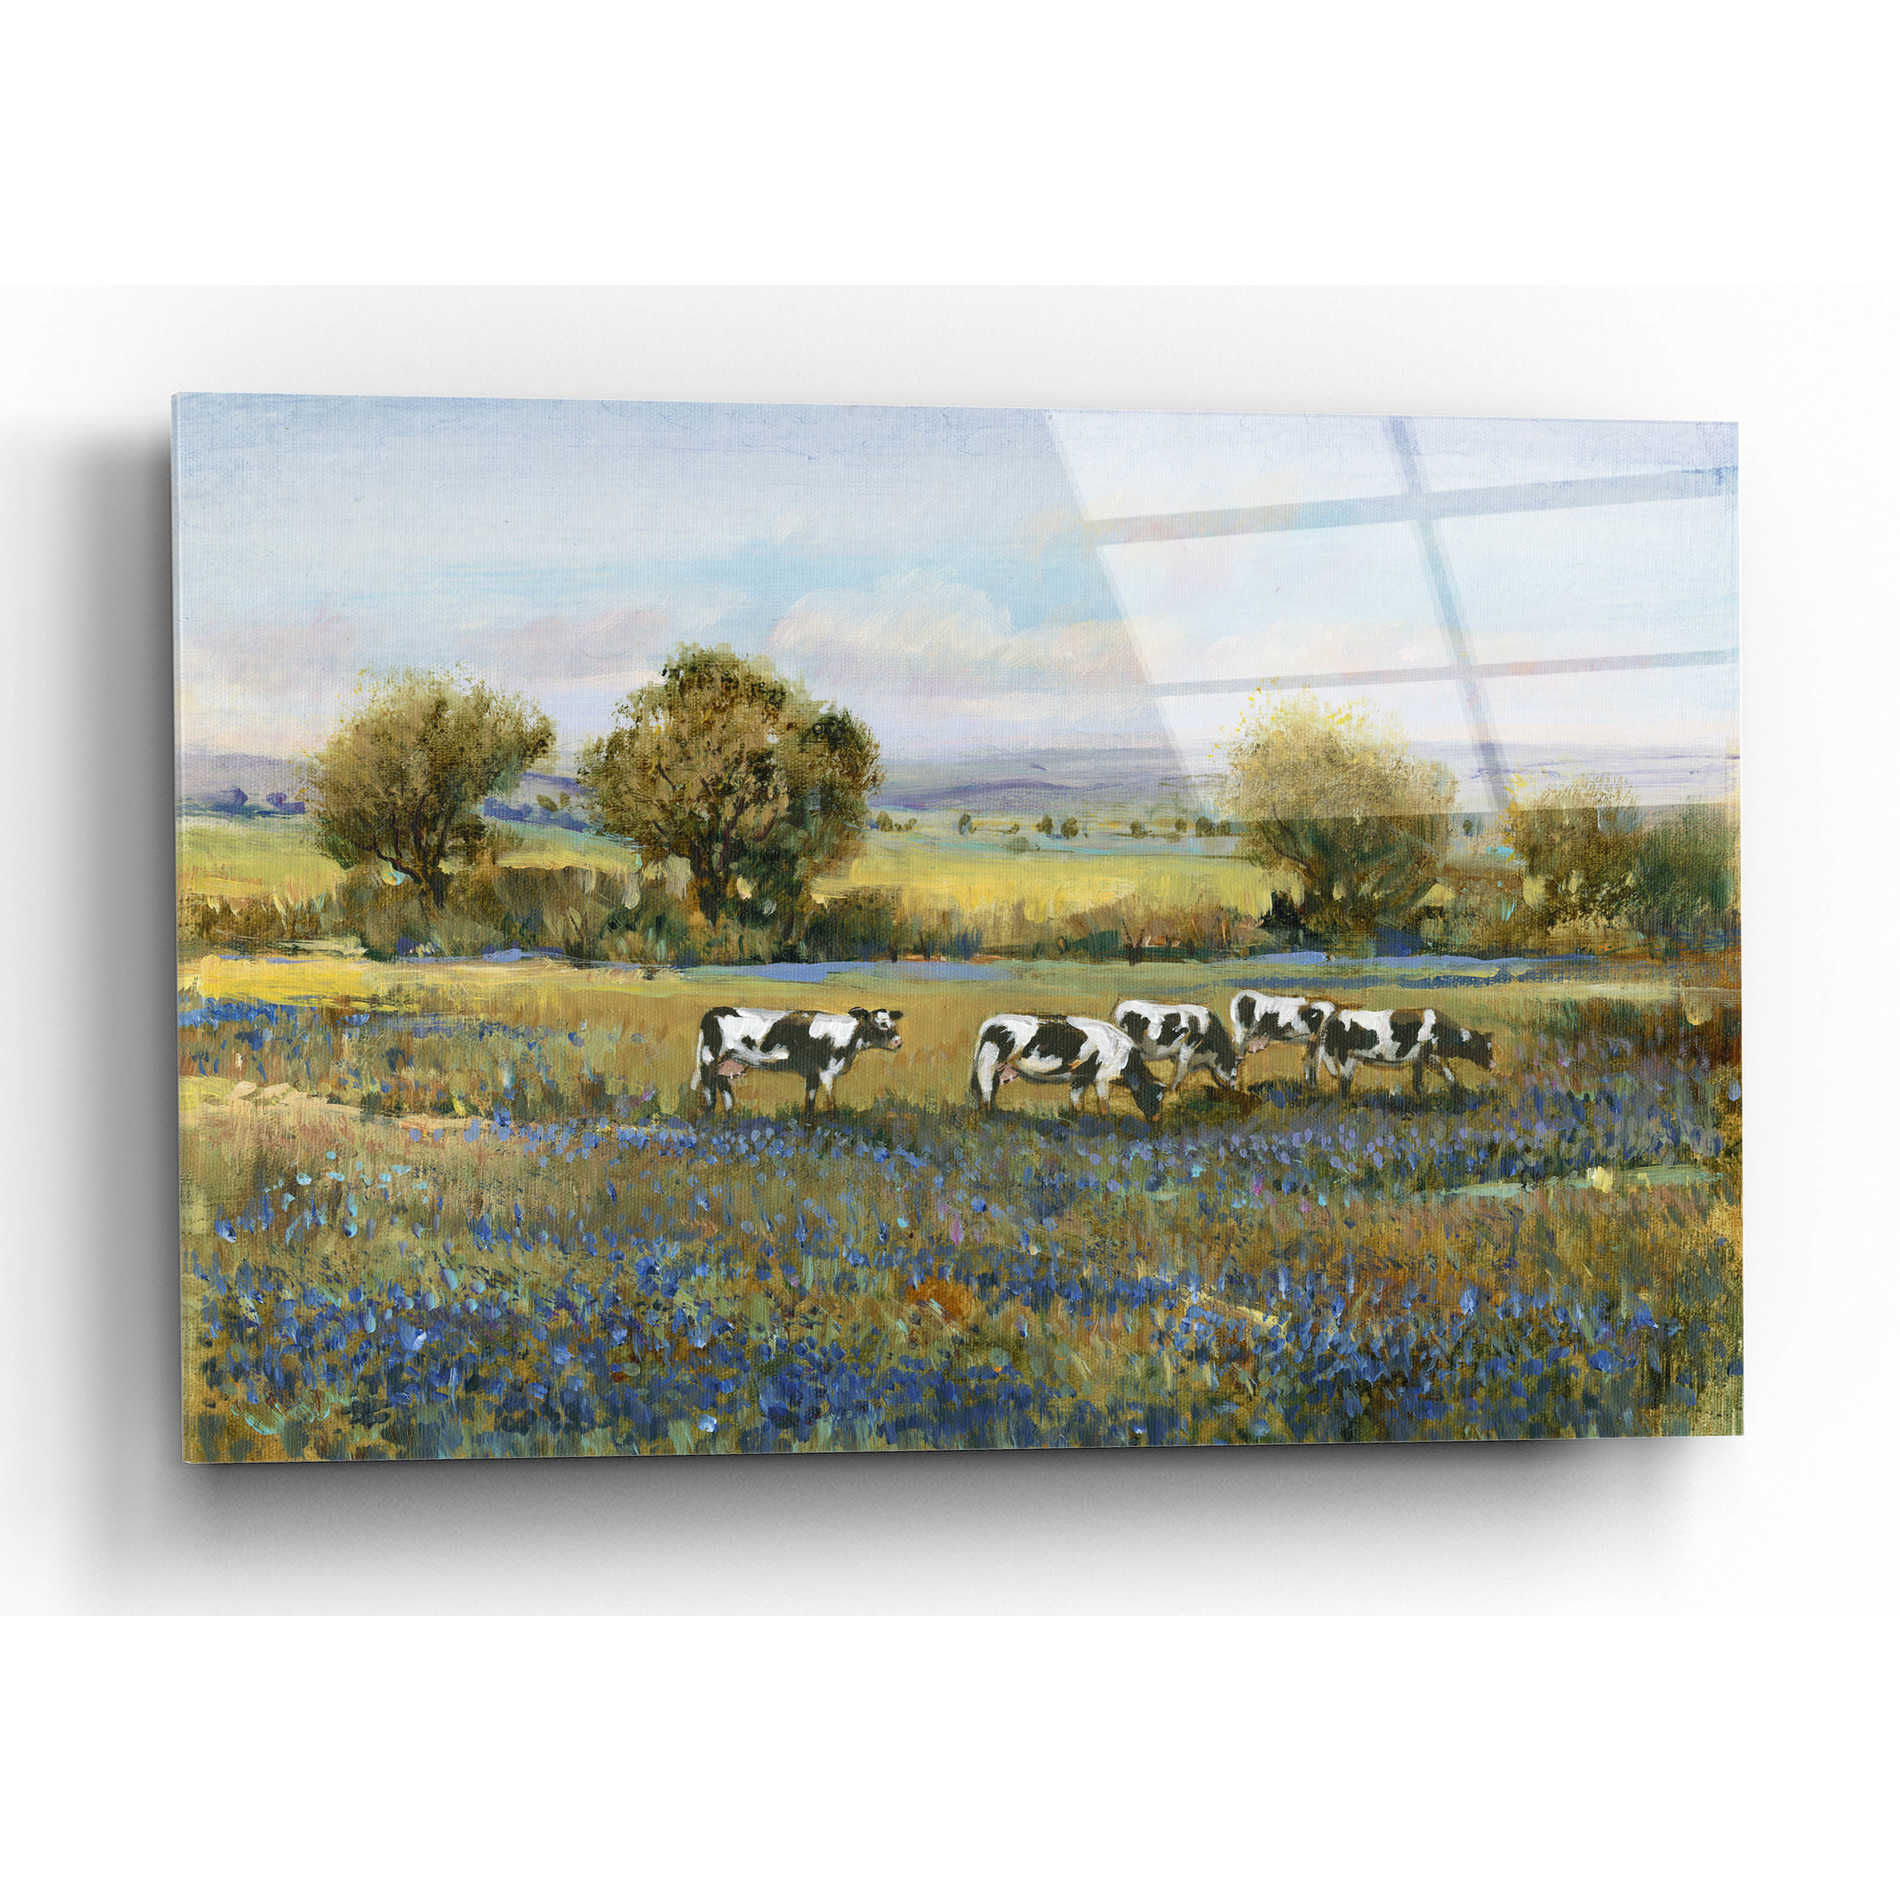 Epic Art 'Field of Cattle I' by Tim O'Toole, Acrylic Glass Wall Art,24x16